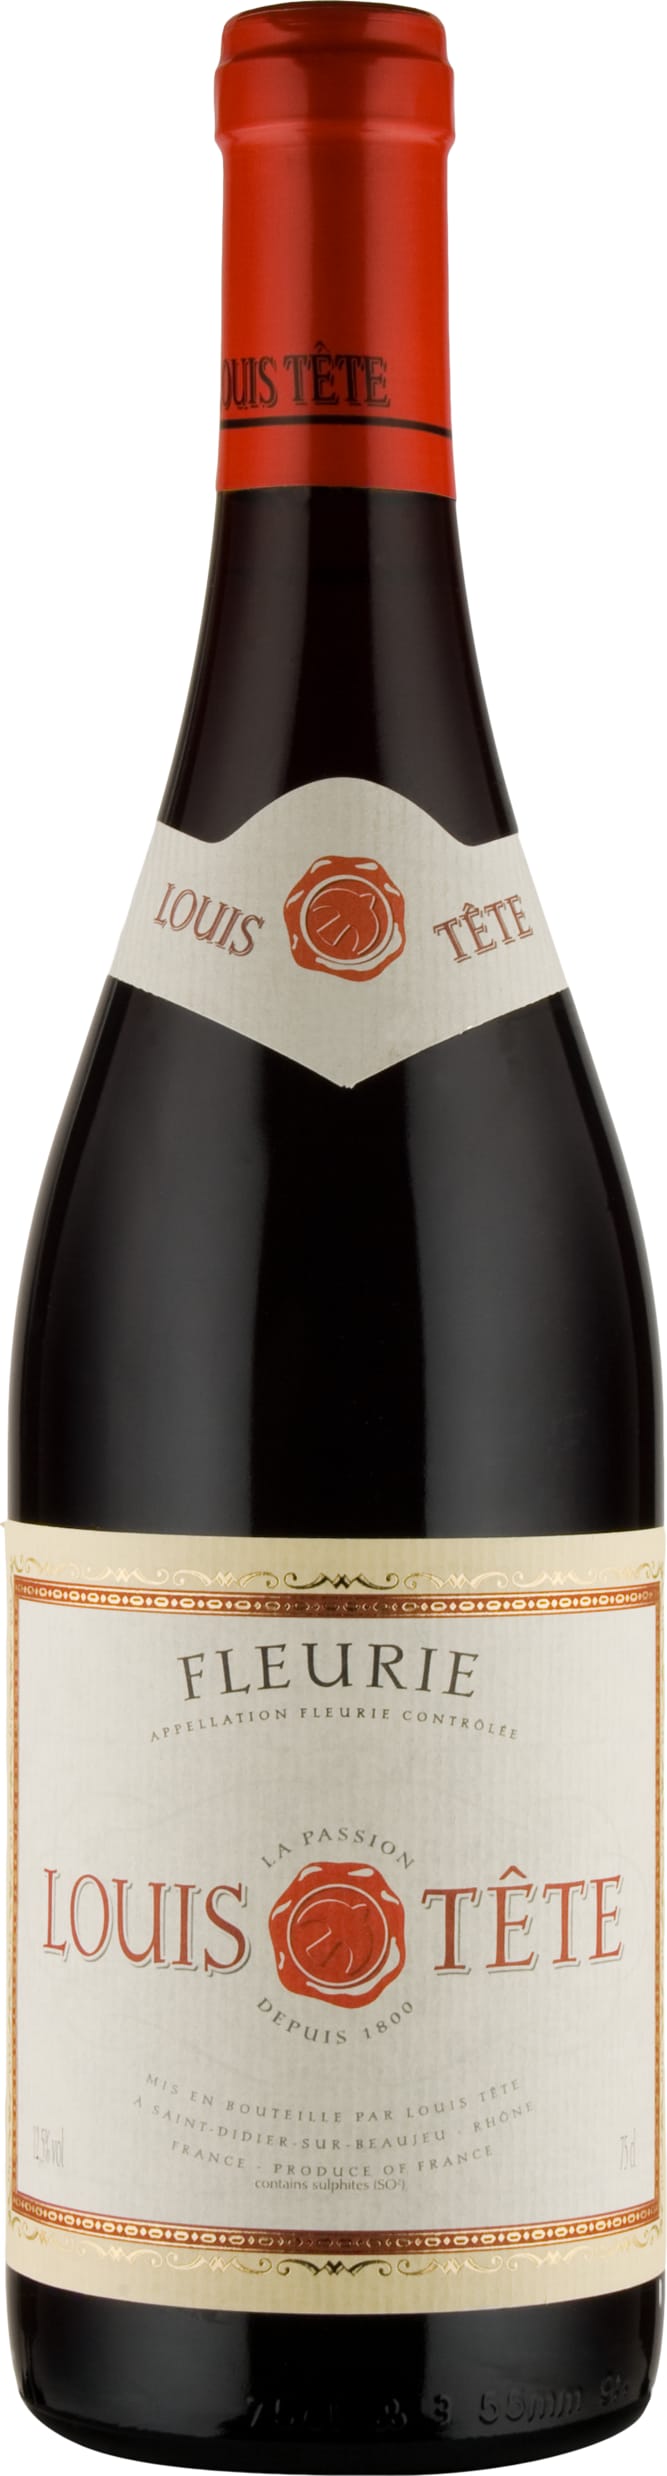 Louis Tete Fleurie 375cl 2022 37.5cl - Buy Louis Tete Wines from GREAT WINES DIRECT wine shop